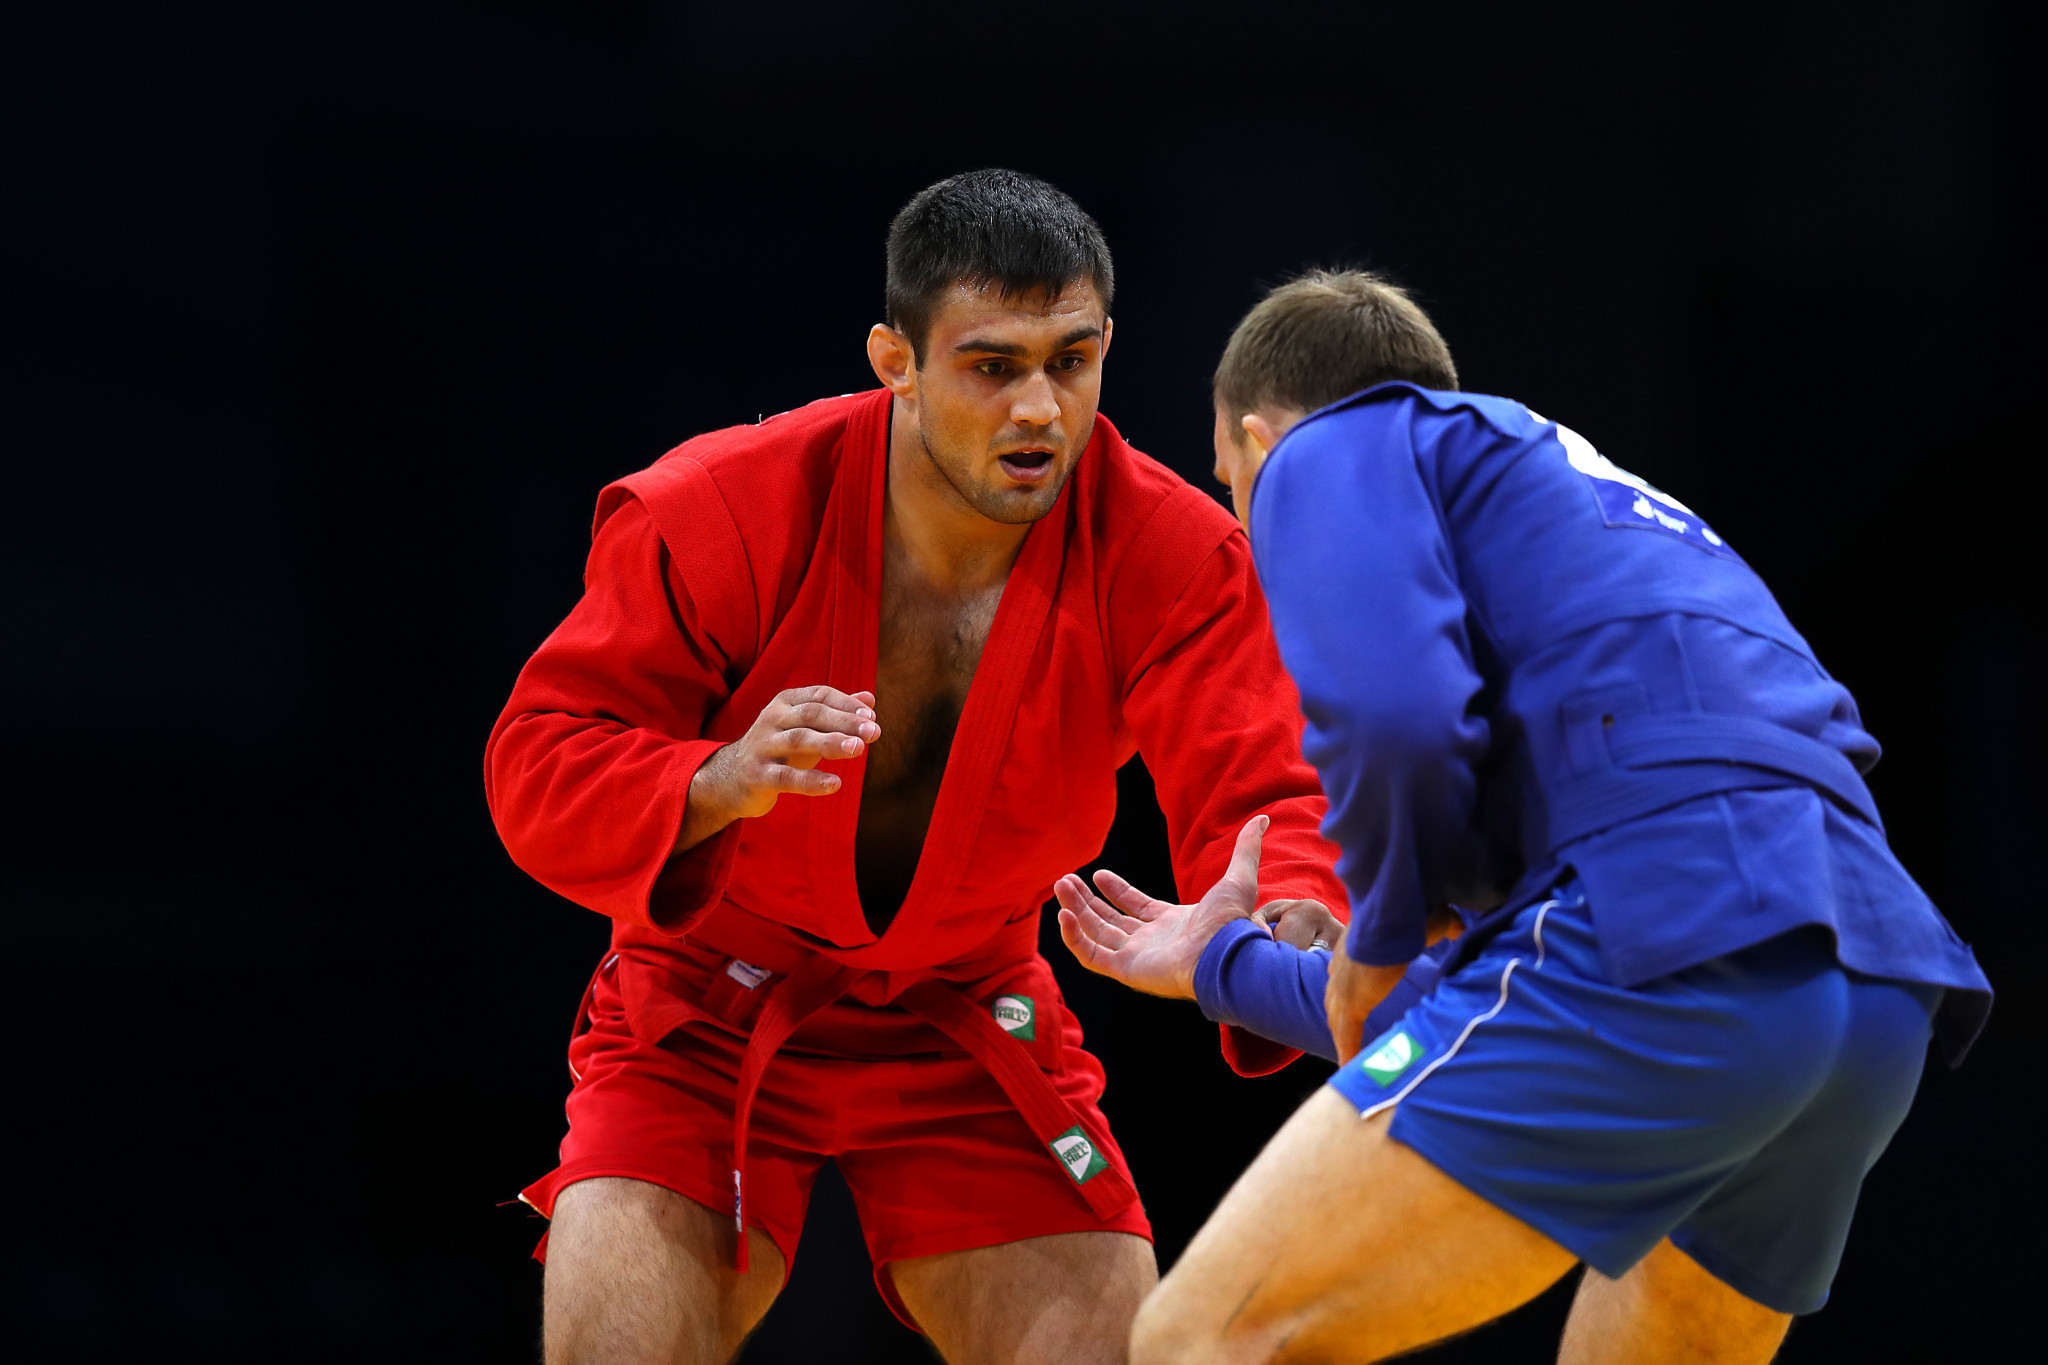 The upcoming Russian Sambo Championship will have new weight classes recommended by the IOC ©Getty Images